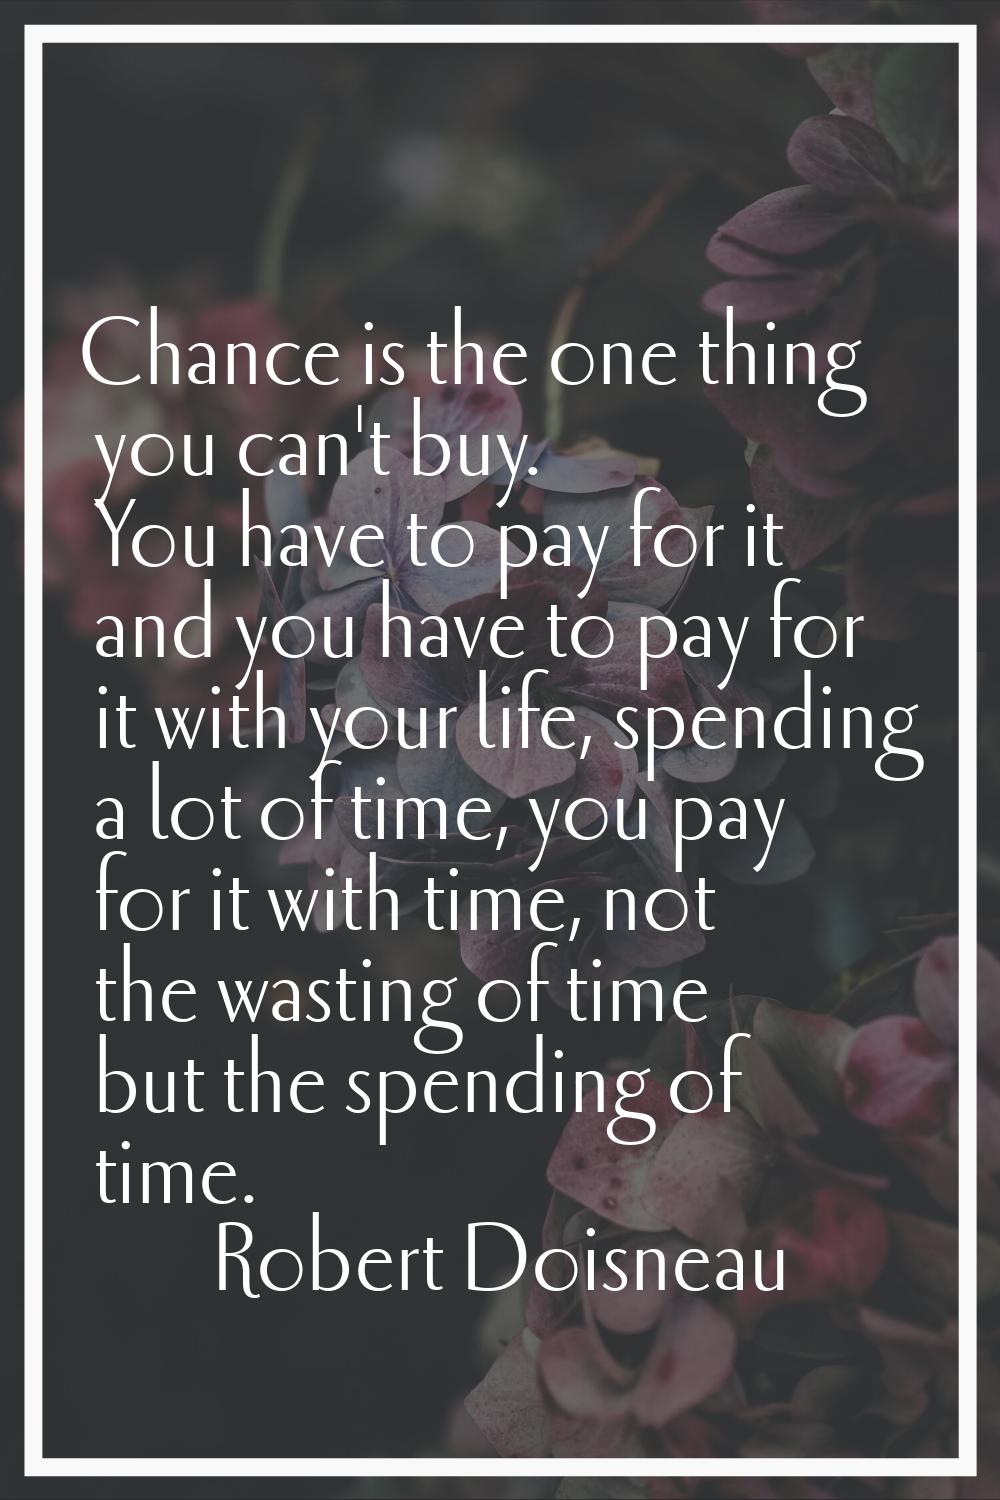 Chance is the one thing you can't buy. You have to pay for it and you have to pay for it with your 